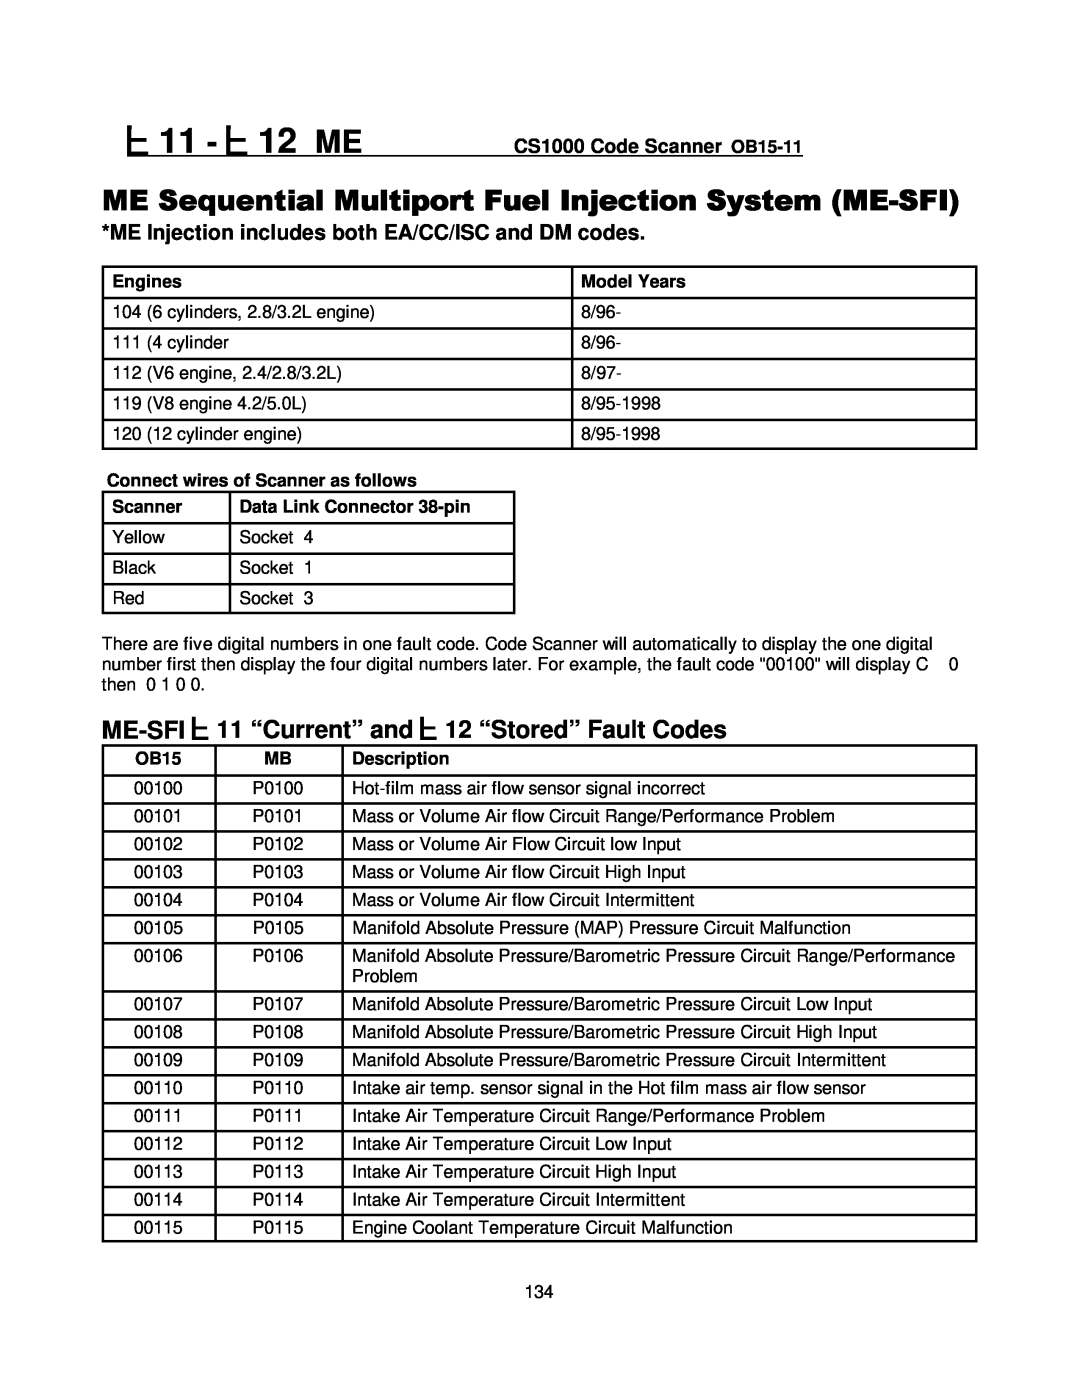 Mercedes-Benz manual #11 - 12 MECS1000 Code Scanner OB15-11$, Me-Sfi, 11 “Current” and, 12 “Stored” Fault Codes, Engines 